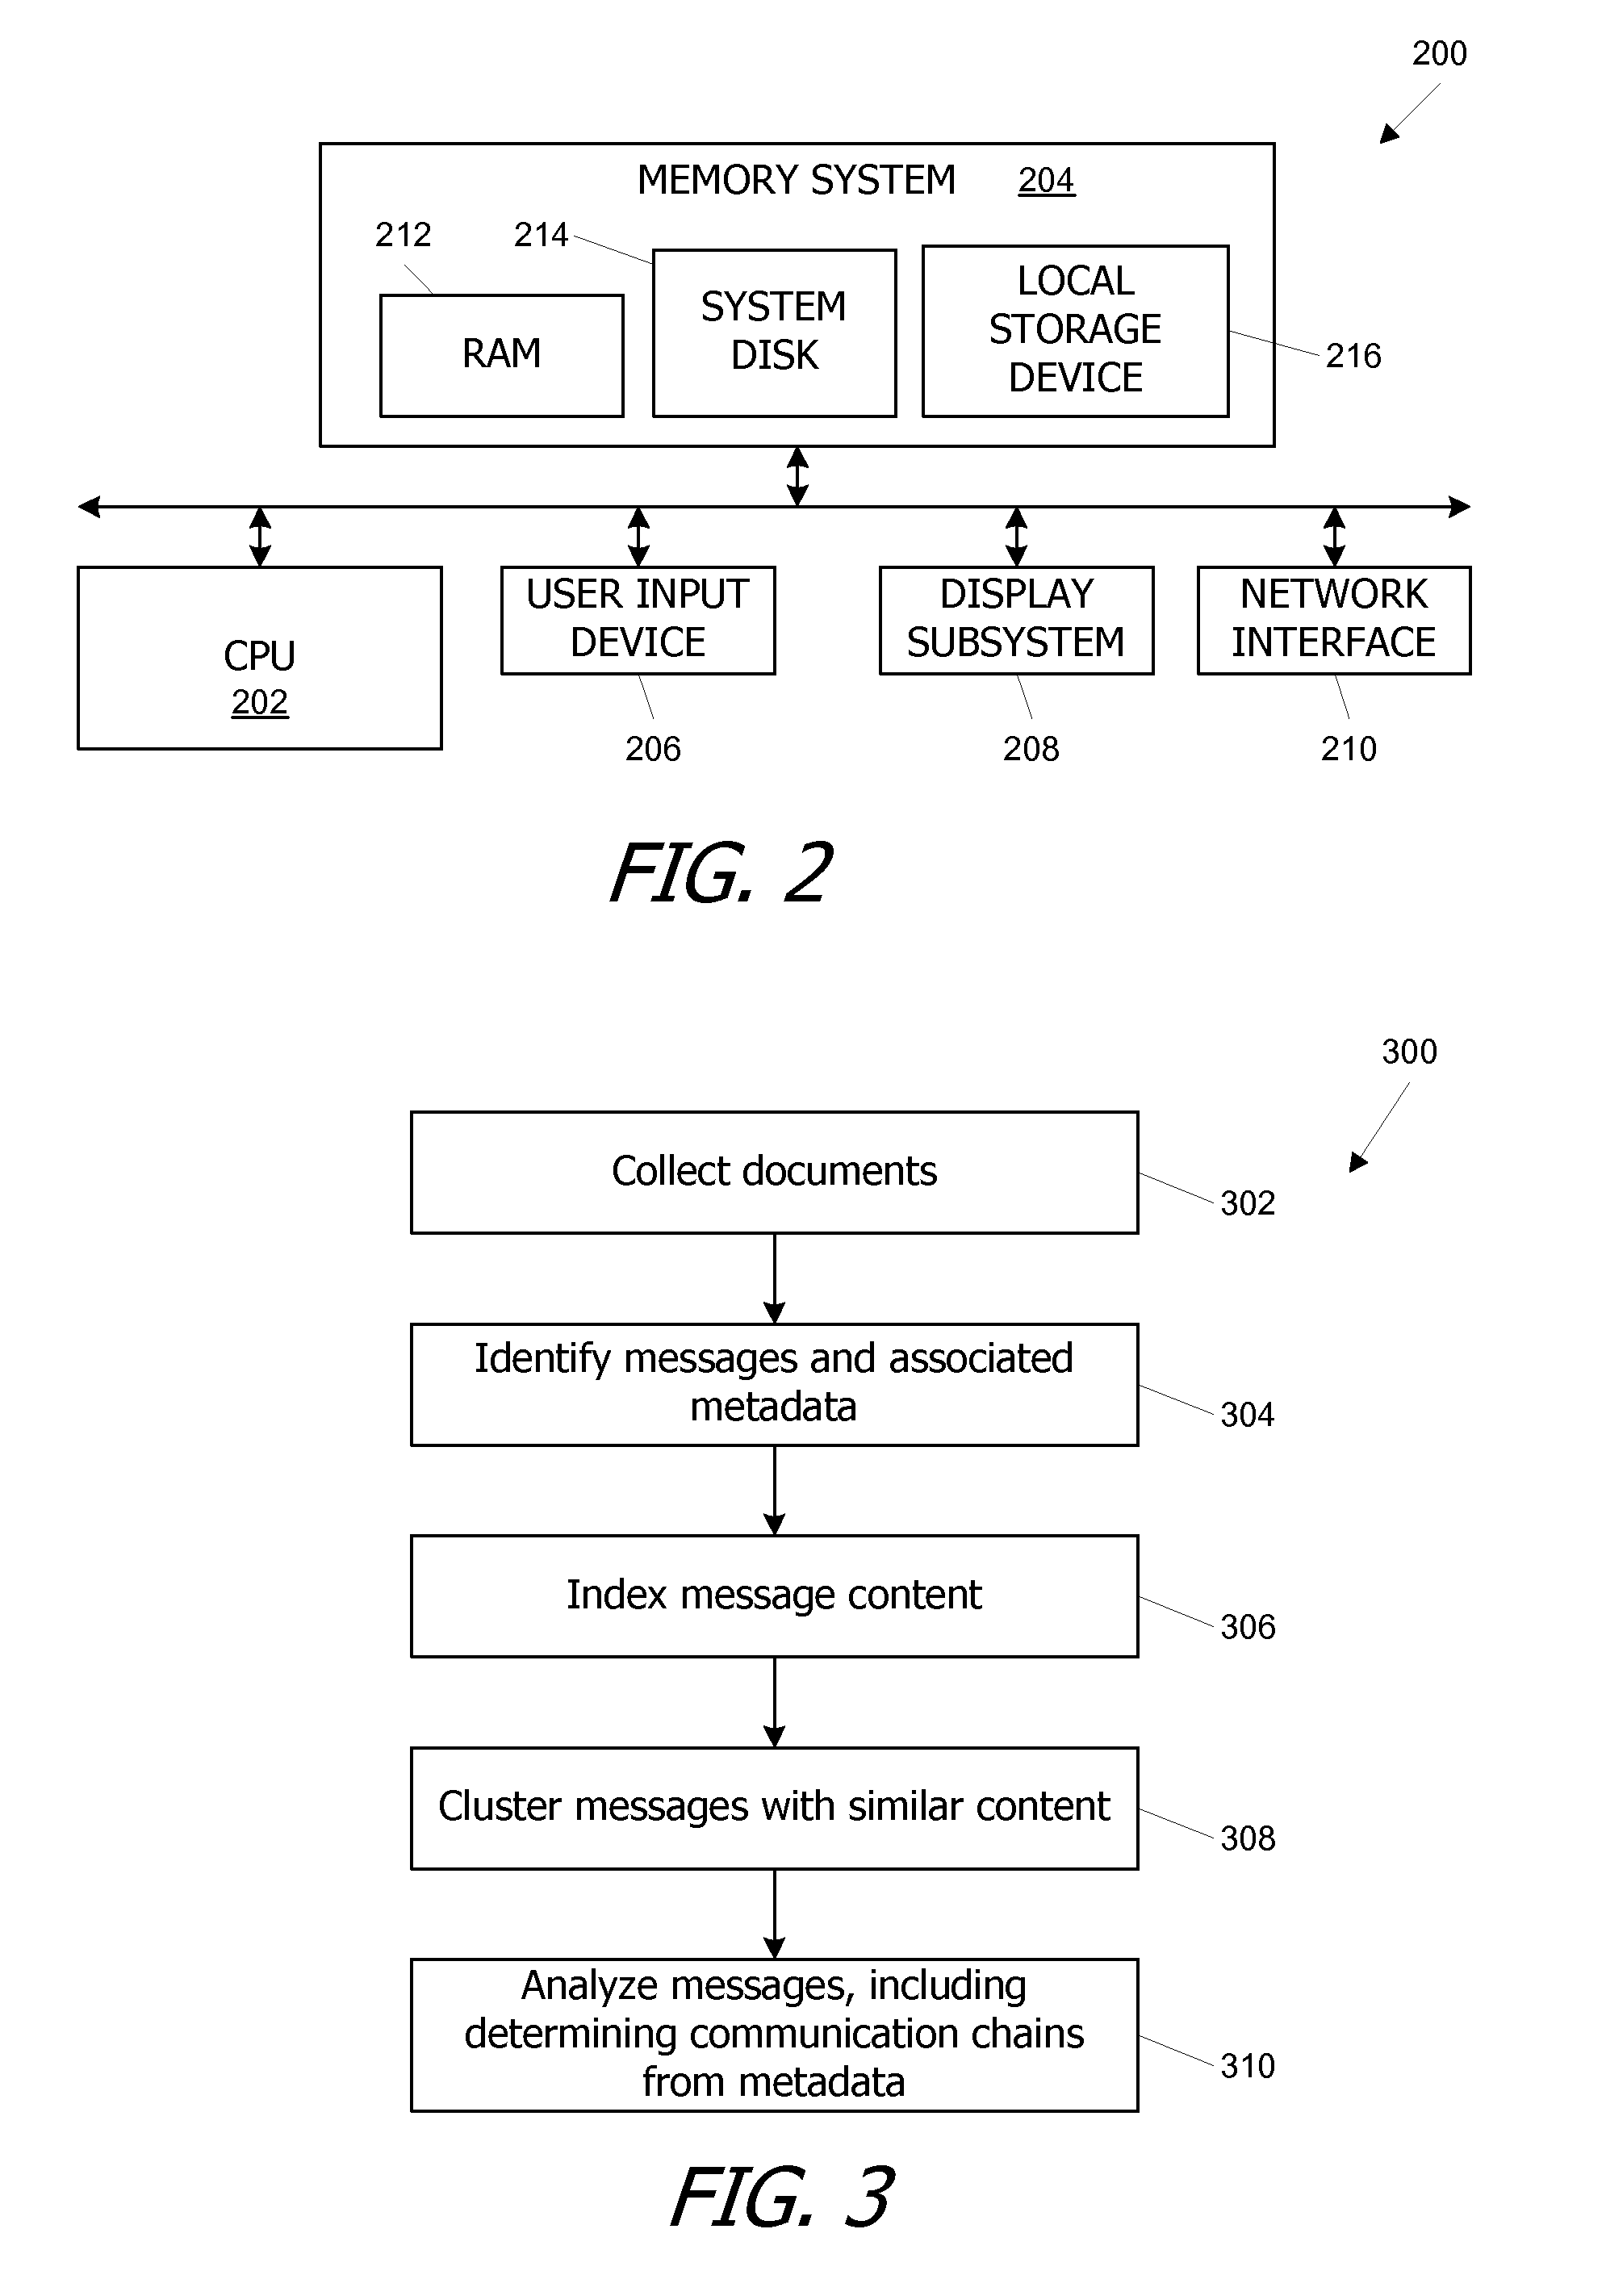 Systems and methods for determining communication chains based on messages